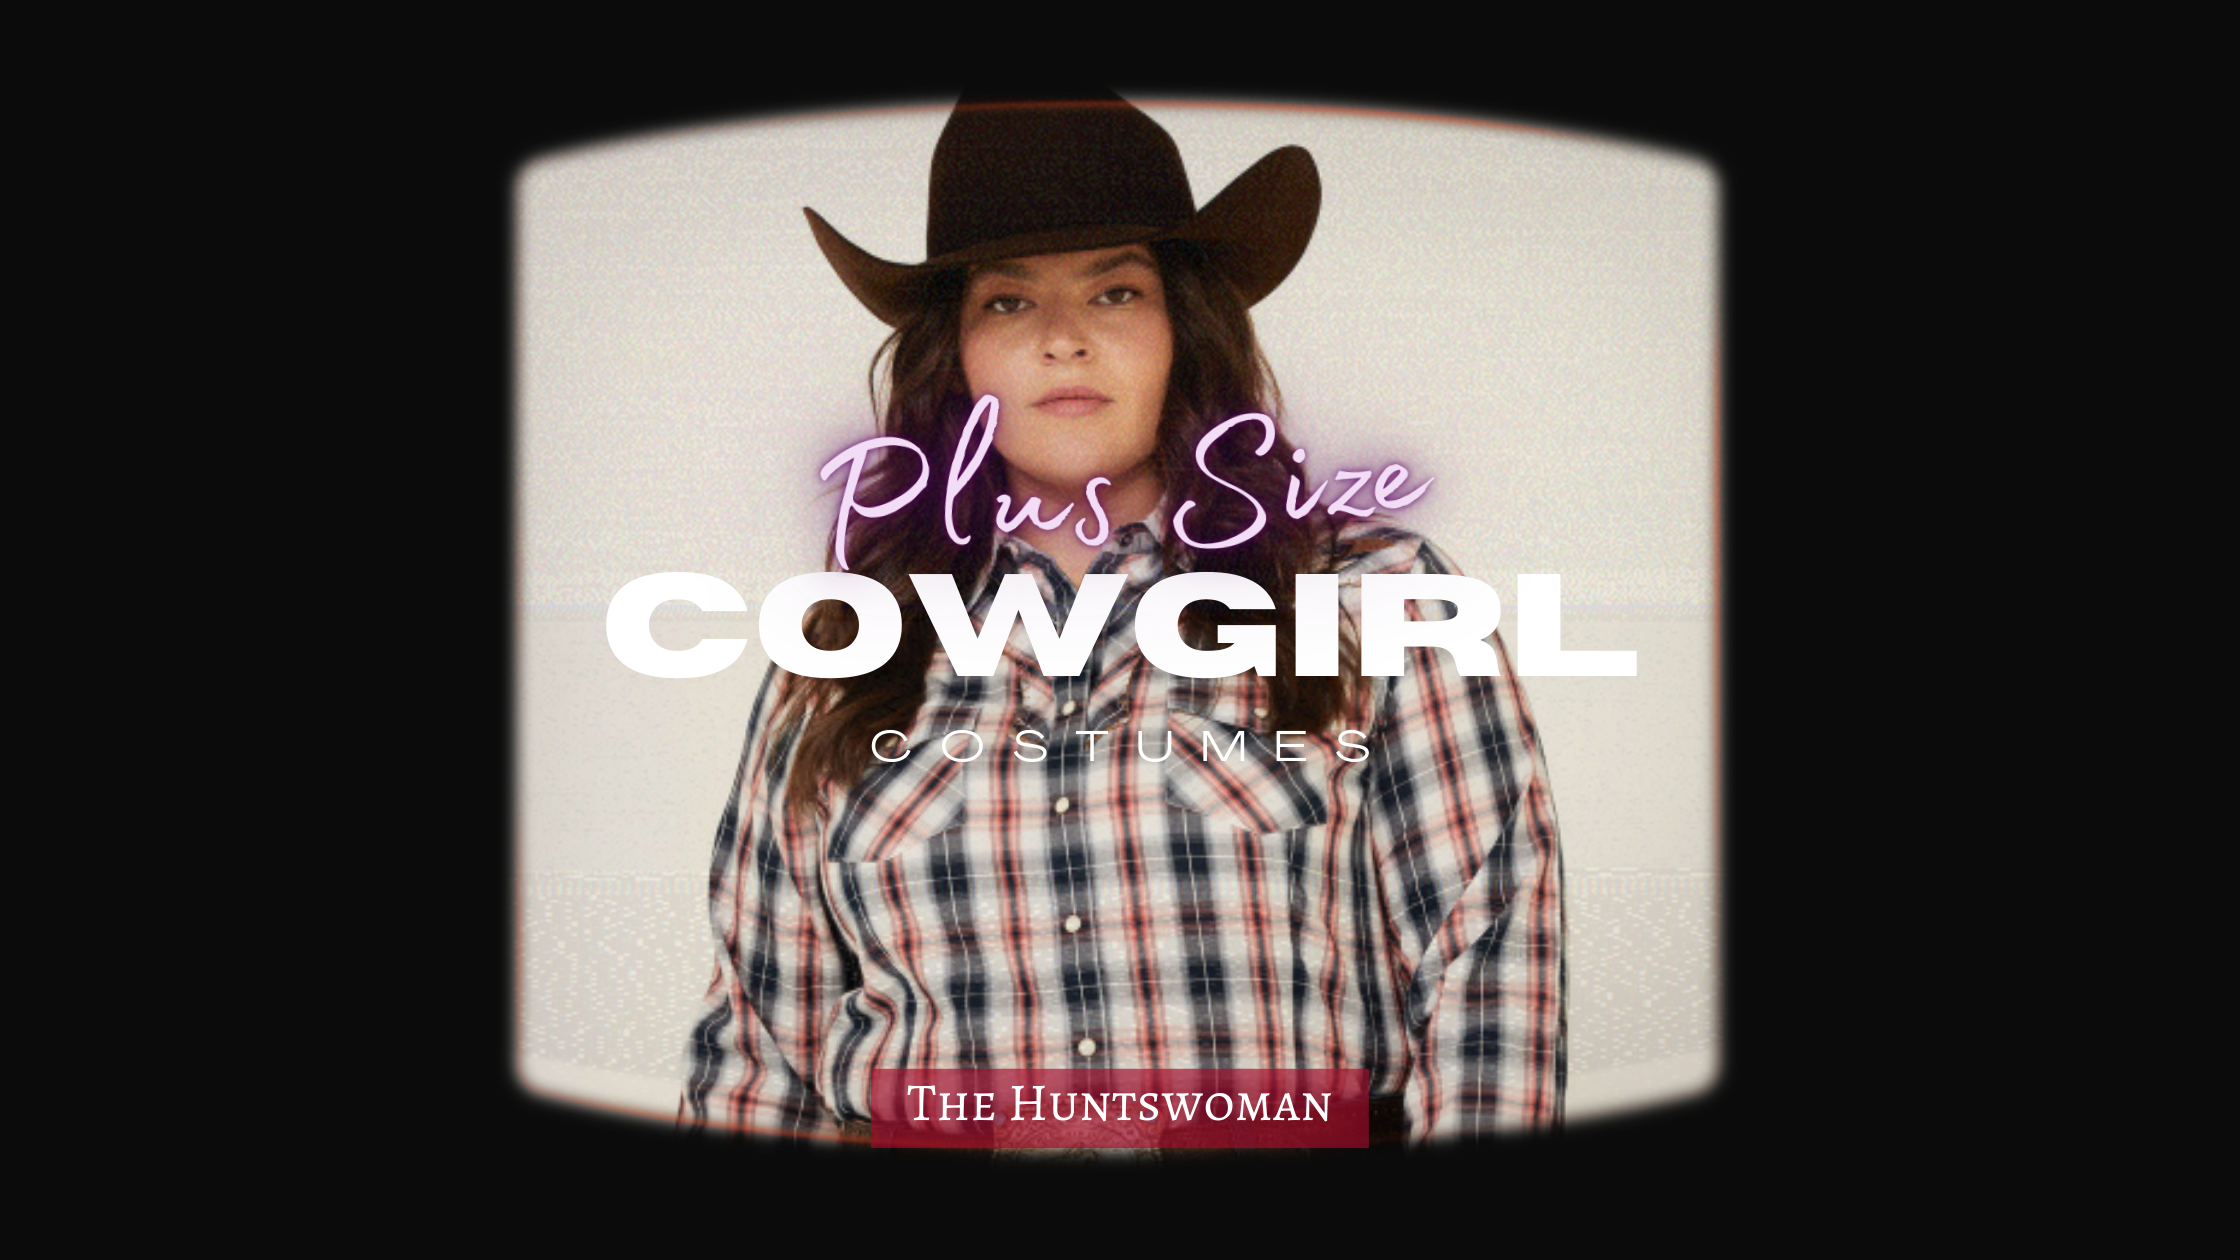 19 Size Cowgirl Costumes | Western - The Huntswoman